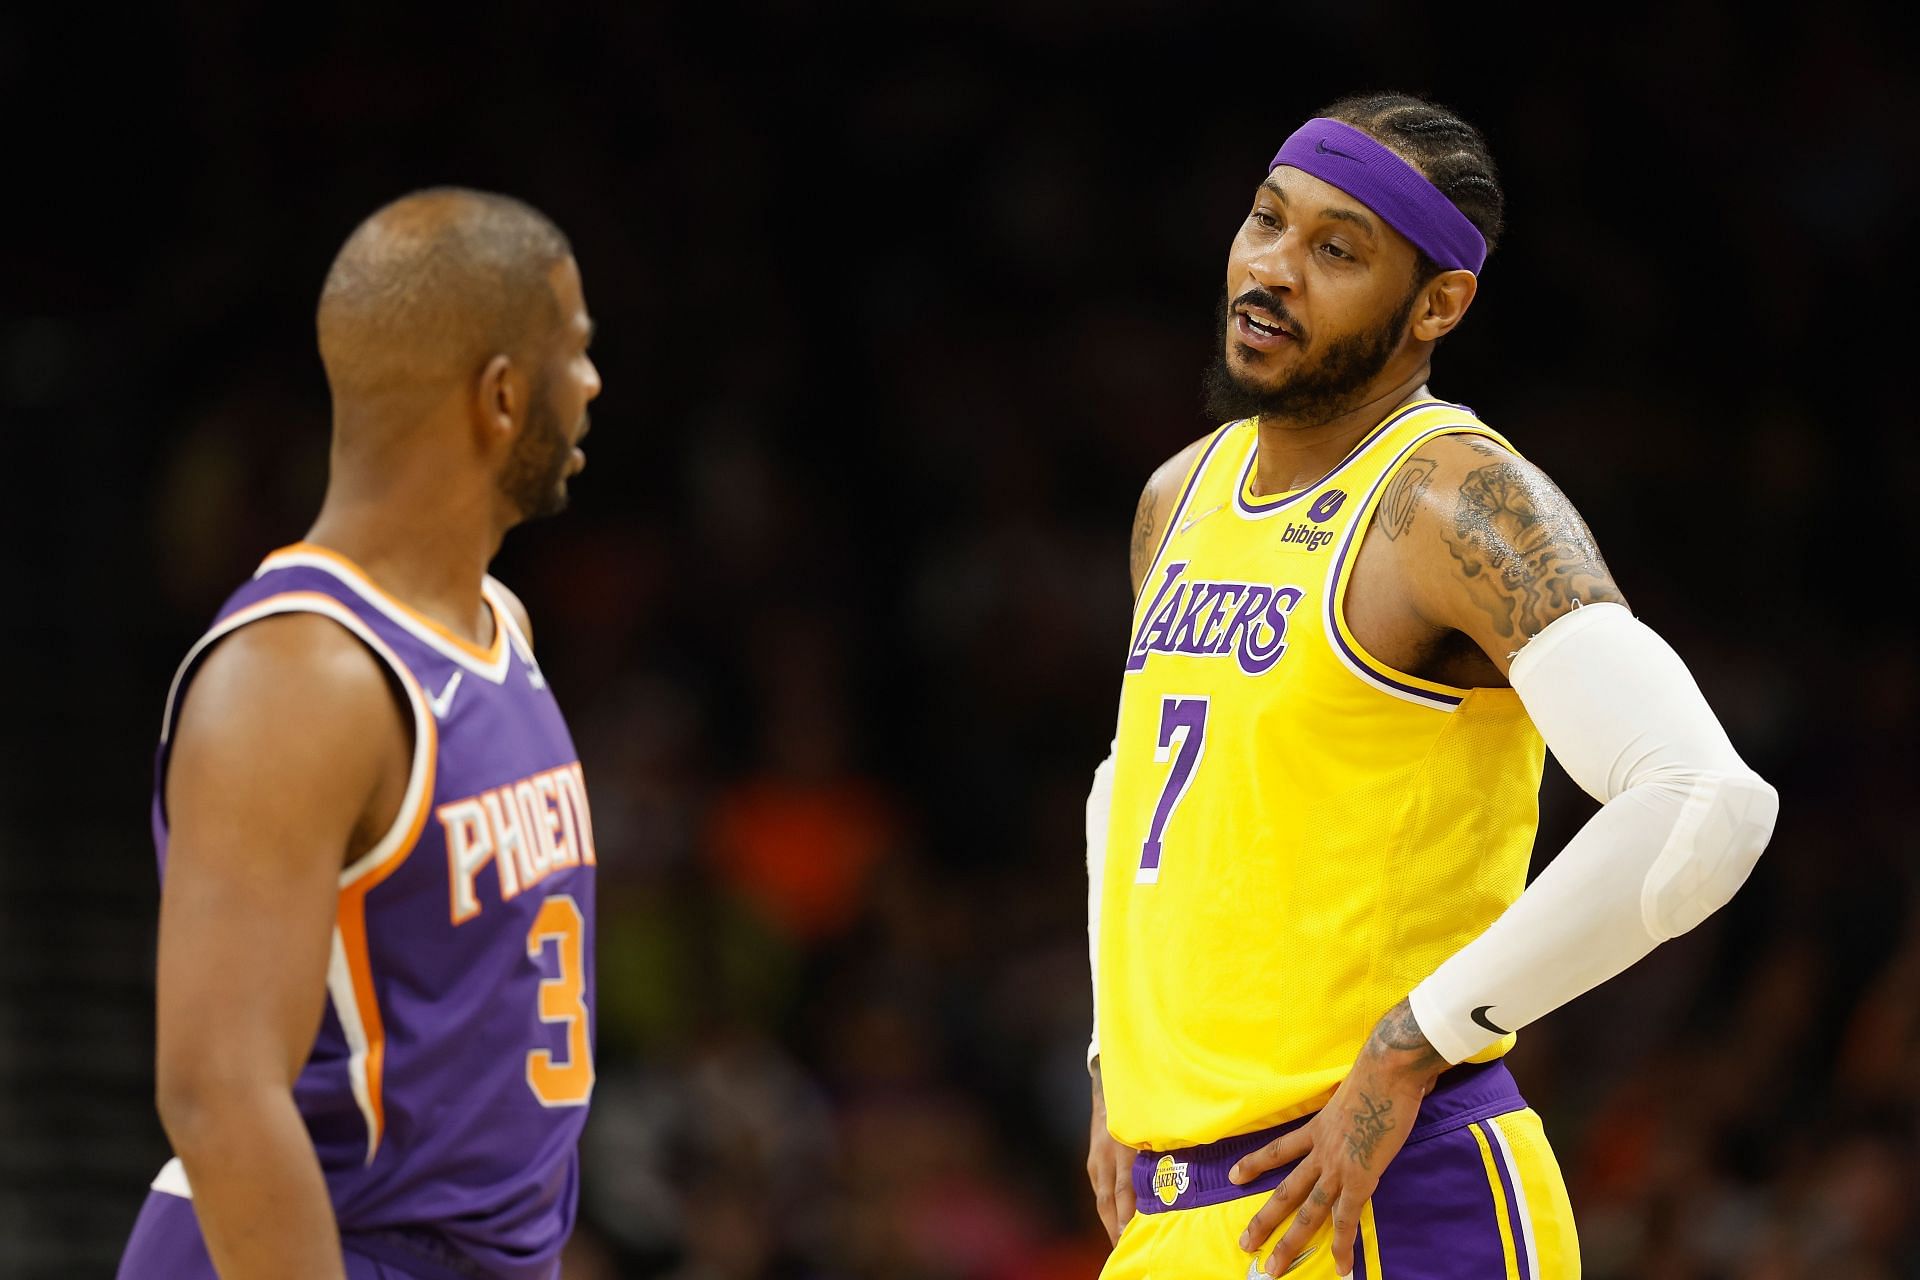 NBA Trade Rumors: Where Will Carmelo Anthony End Up?